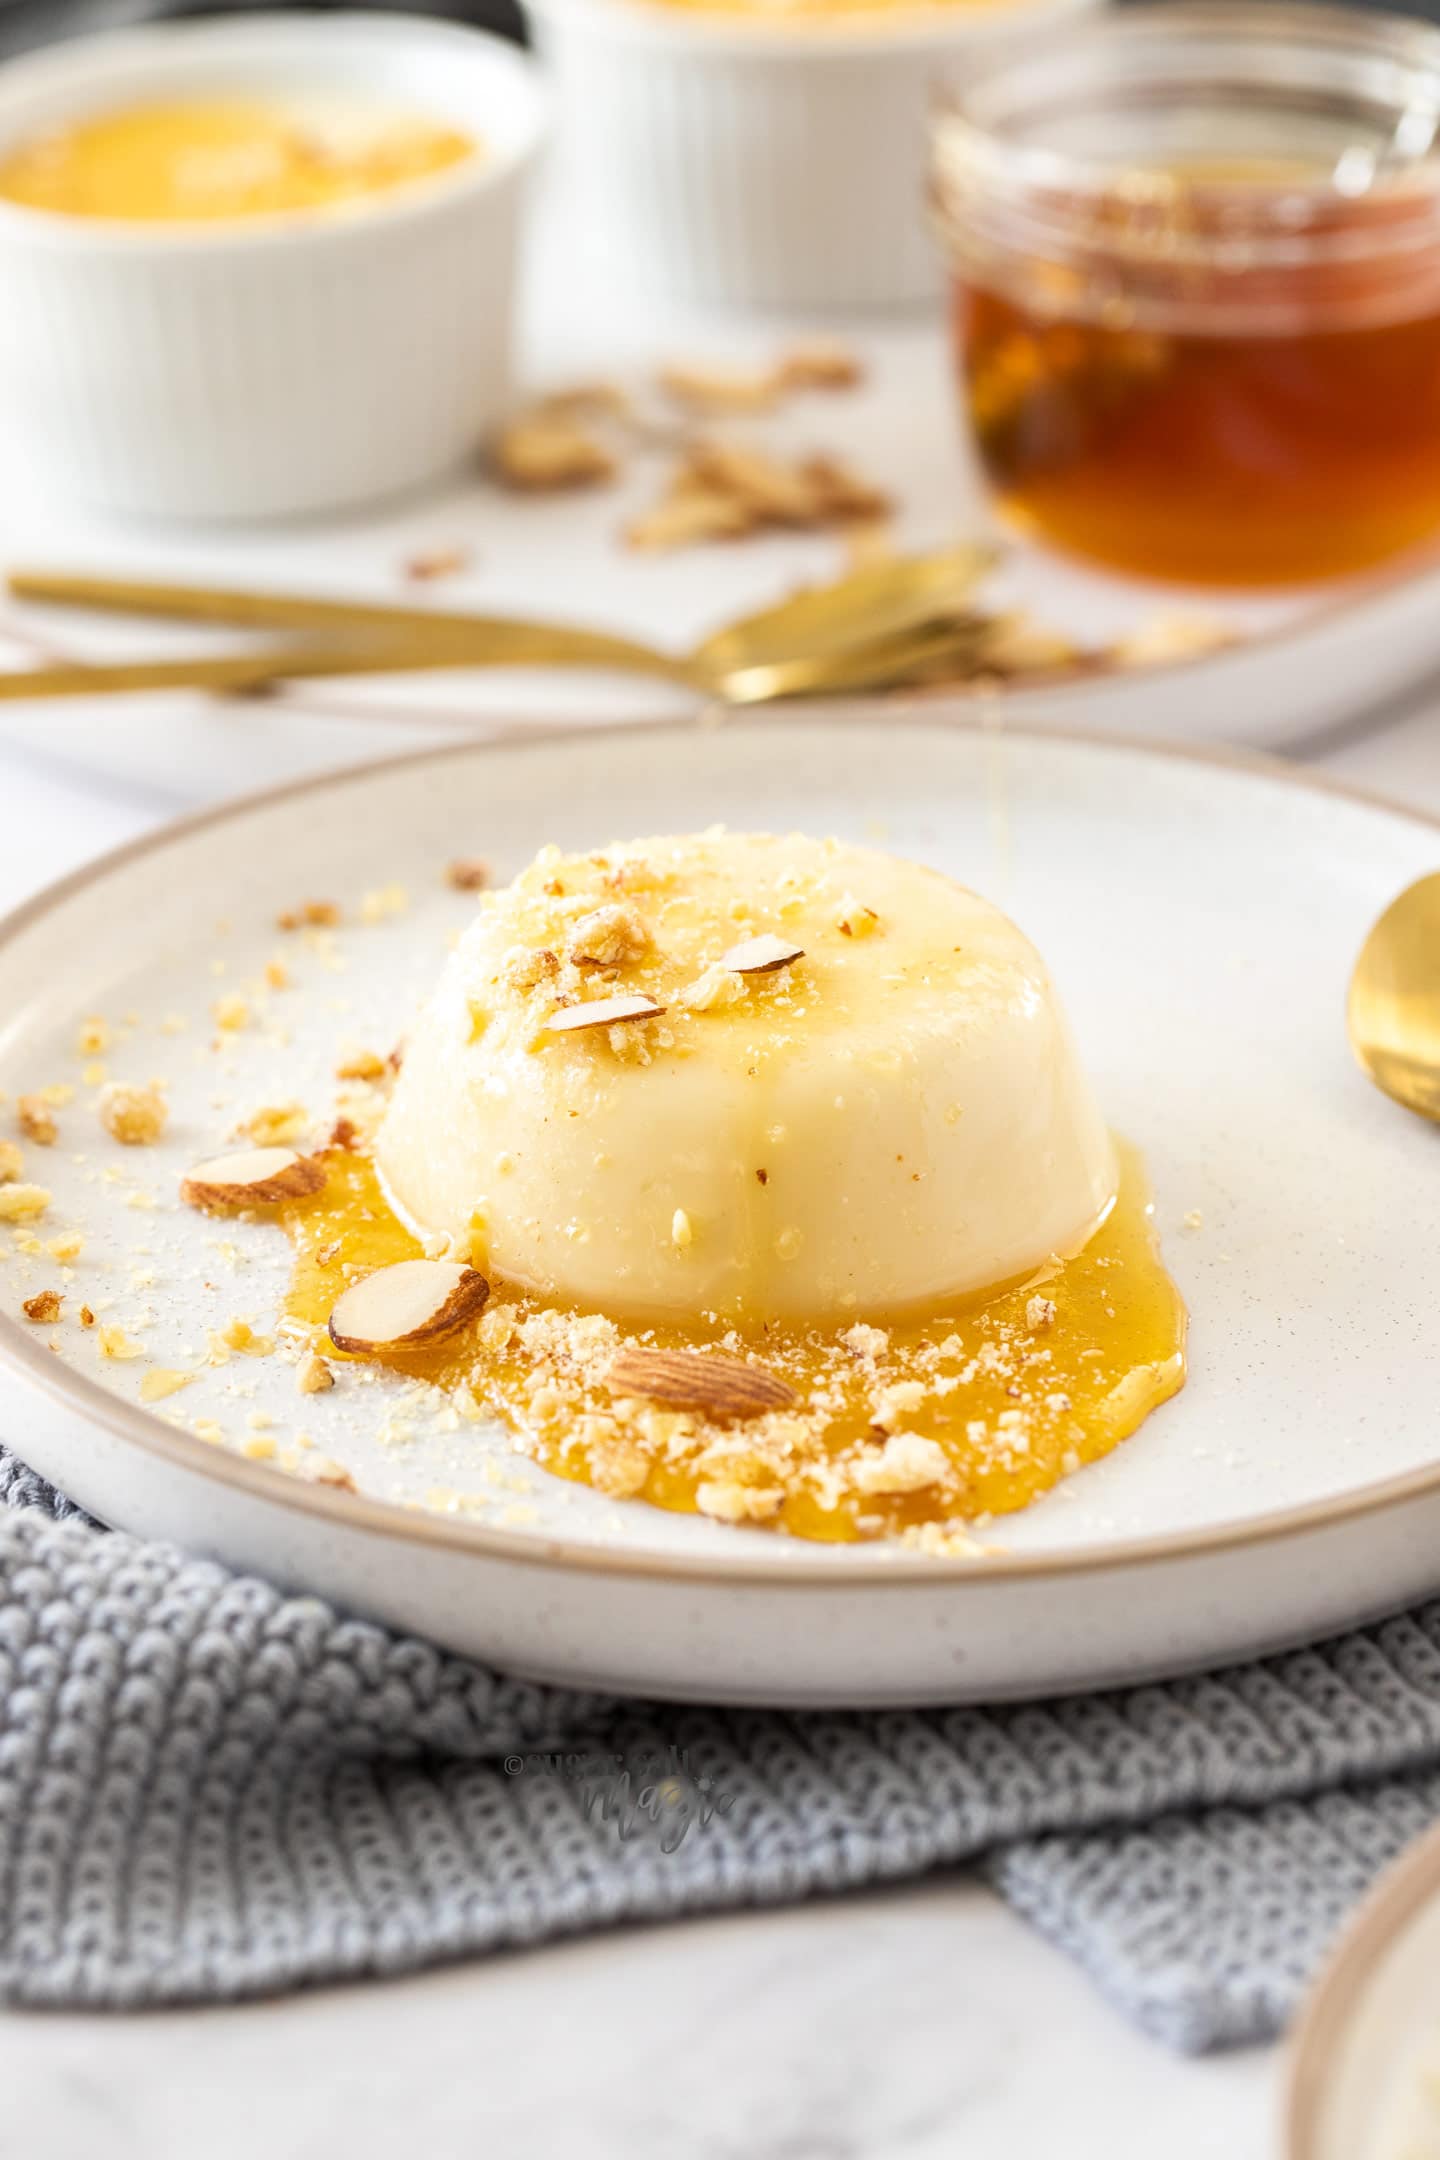 Panna cotta with honey on a plate.